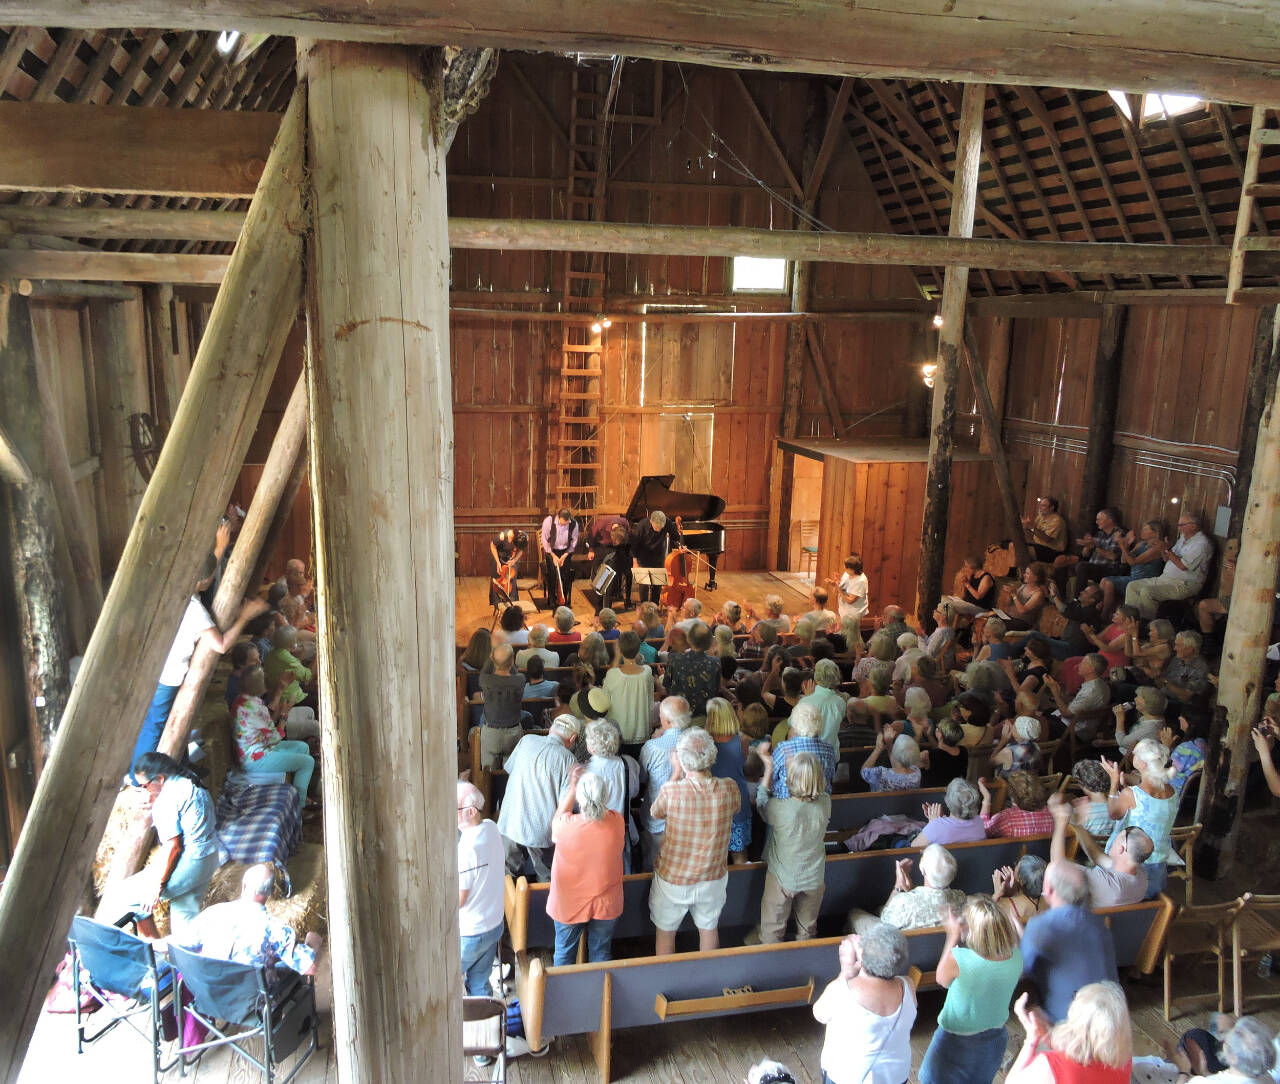 Photo courtesy of Concerts in the Barn / The seventh Concerts in the Barn season, set inside the iconic barn in Quilcene, kicks off Saturday, July 29.